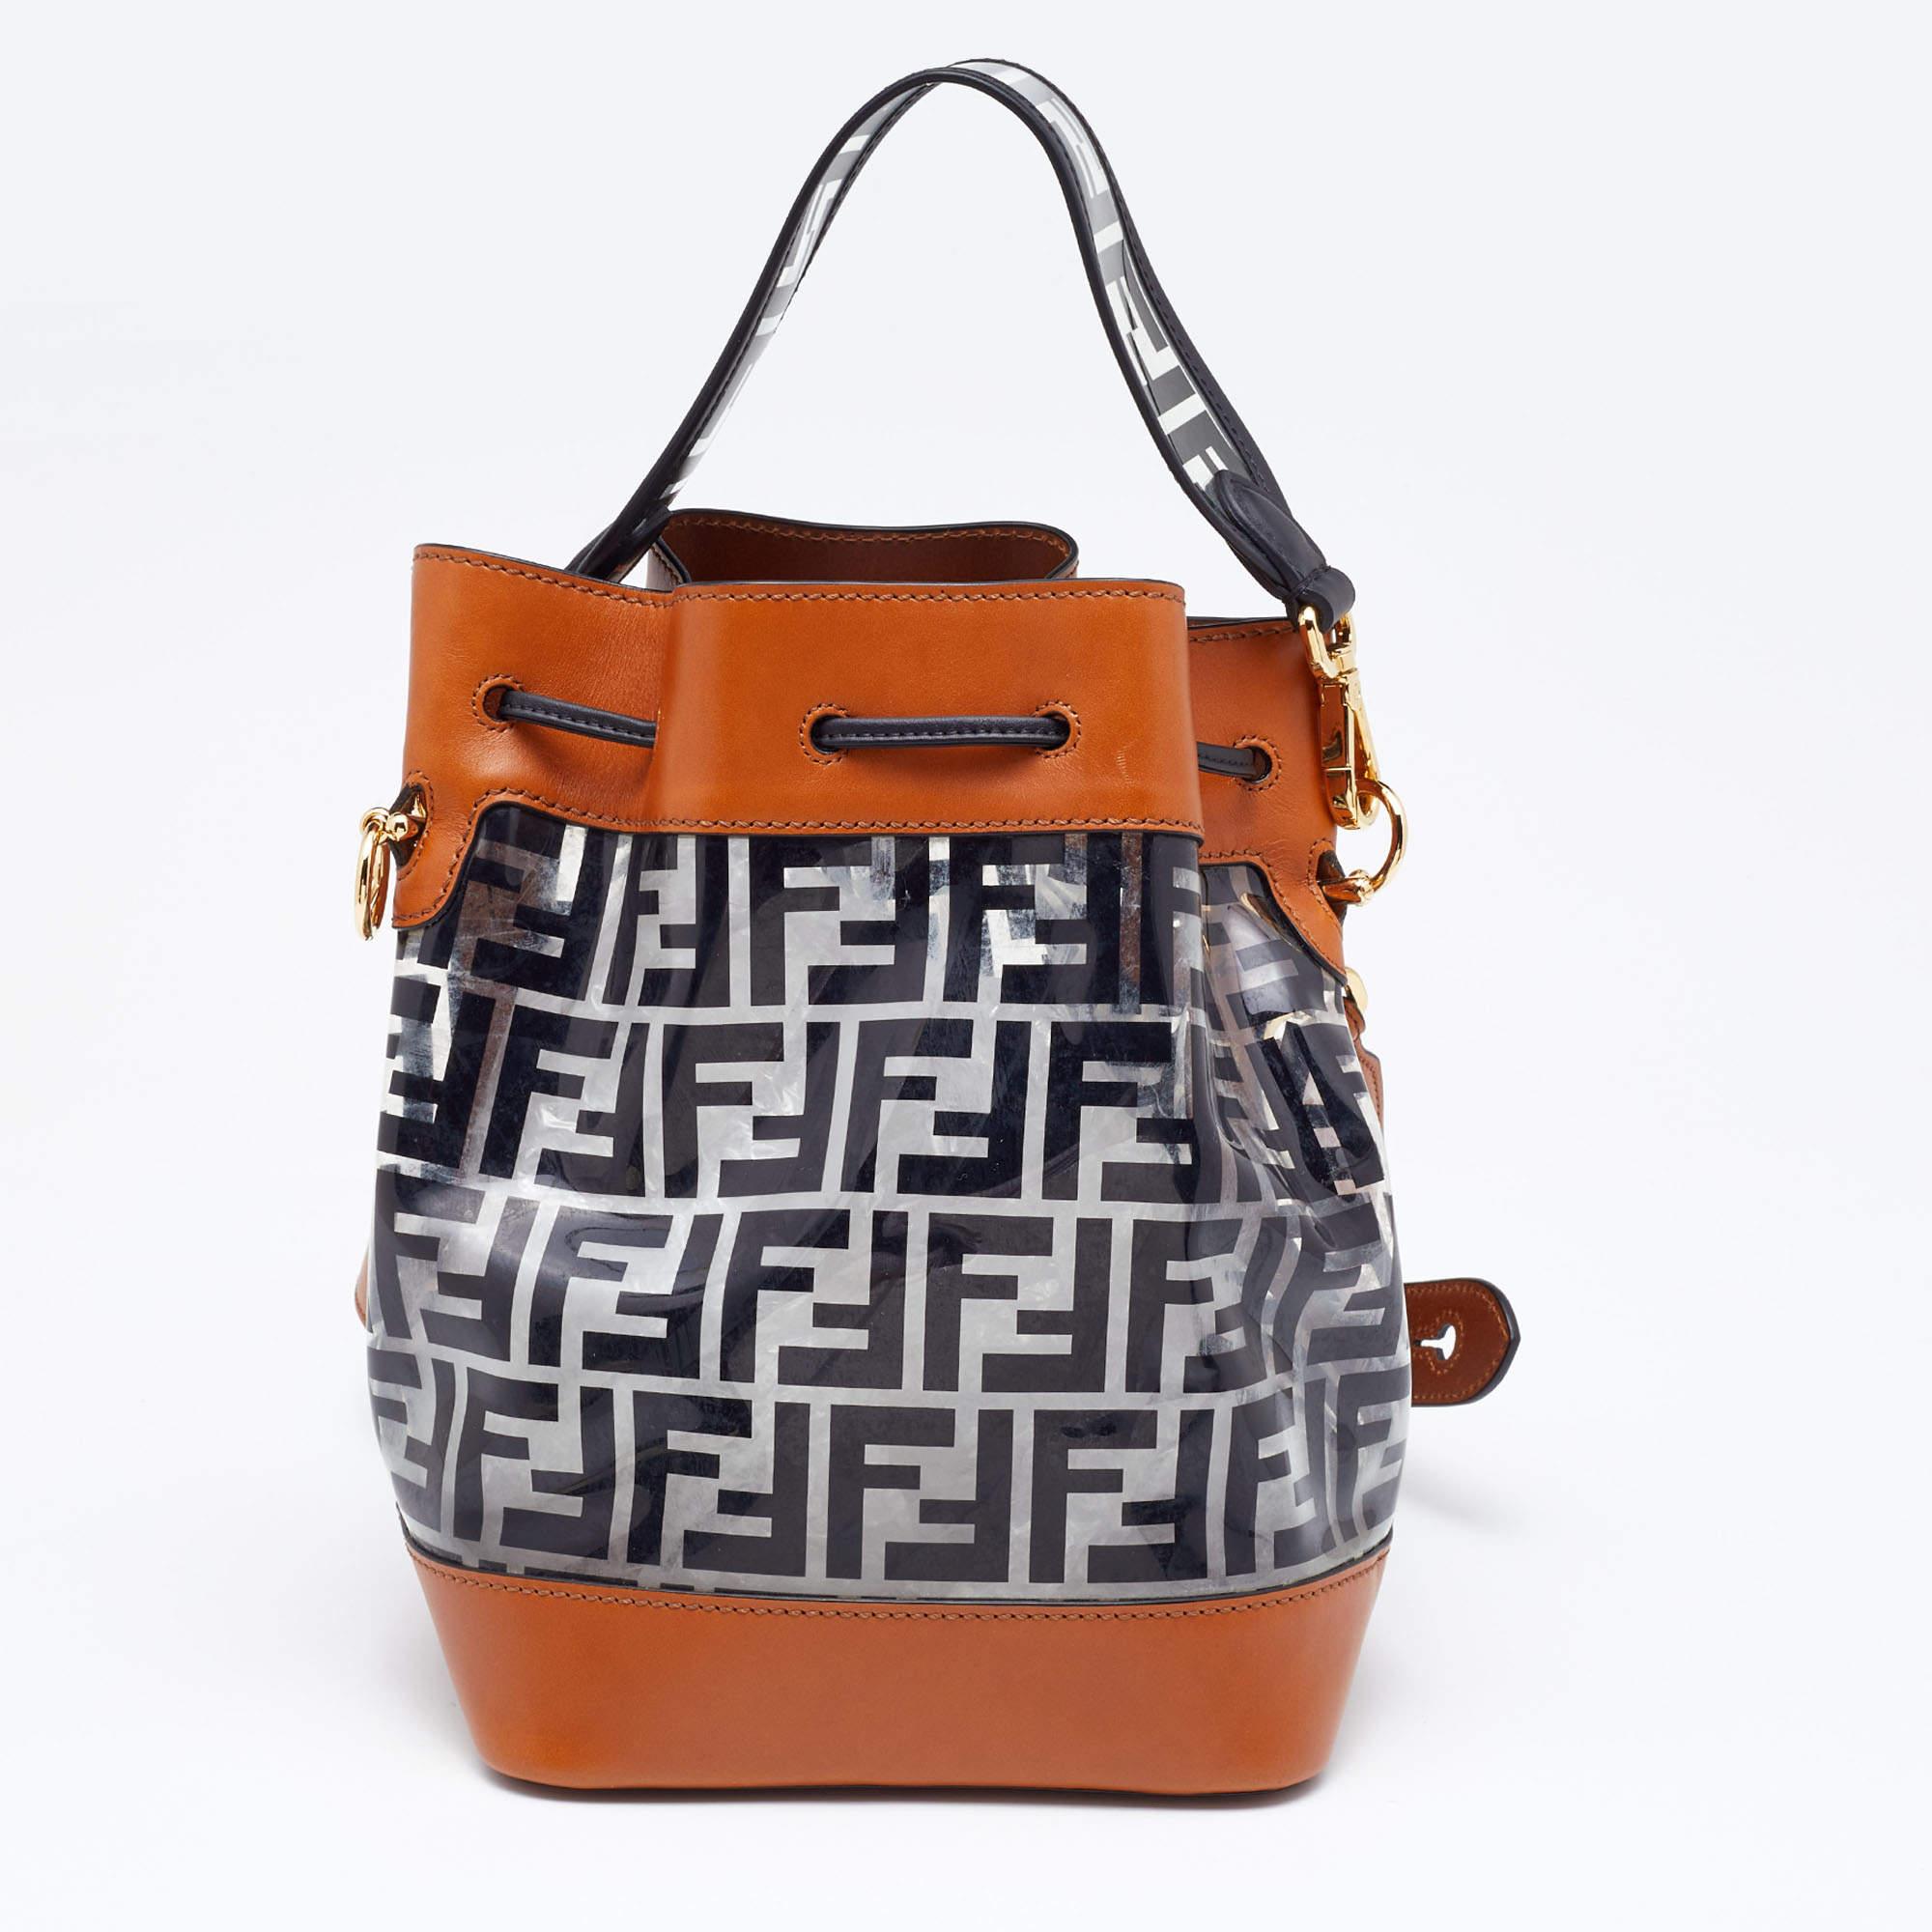 The fashion house’s tradition of excellence, coupled with modern design sensibilities, works to make this Fendi bucket bag one of a kind. It's a fabulous accessory for everyday use.

Includes: Original Dustbag, Info Booklet, Detachable Strap,